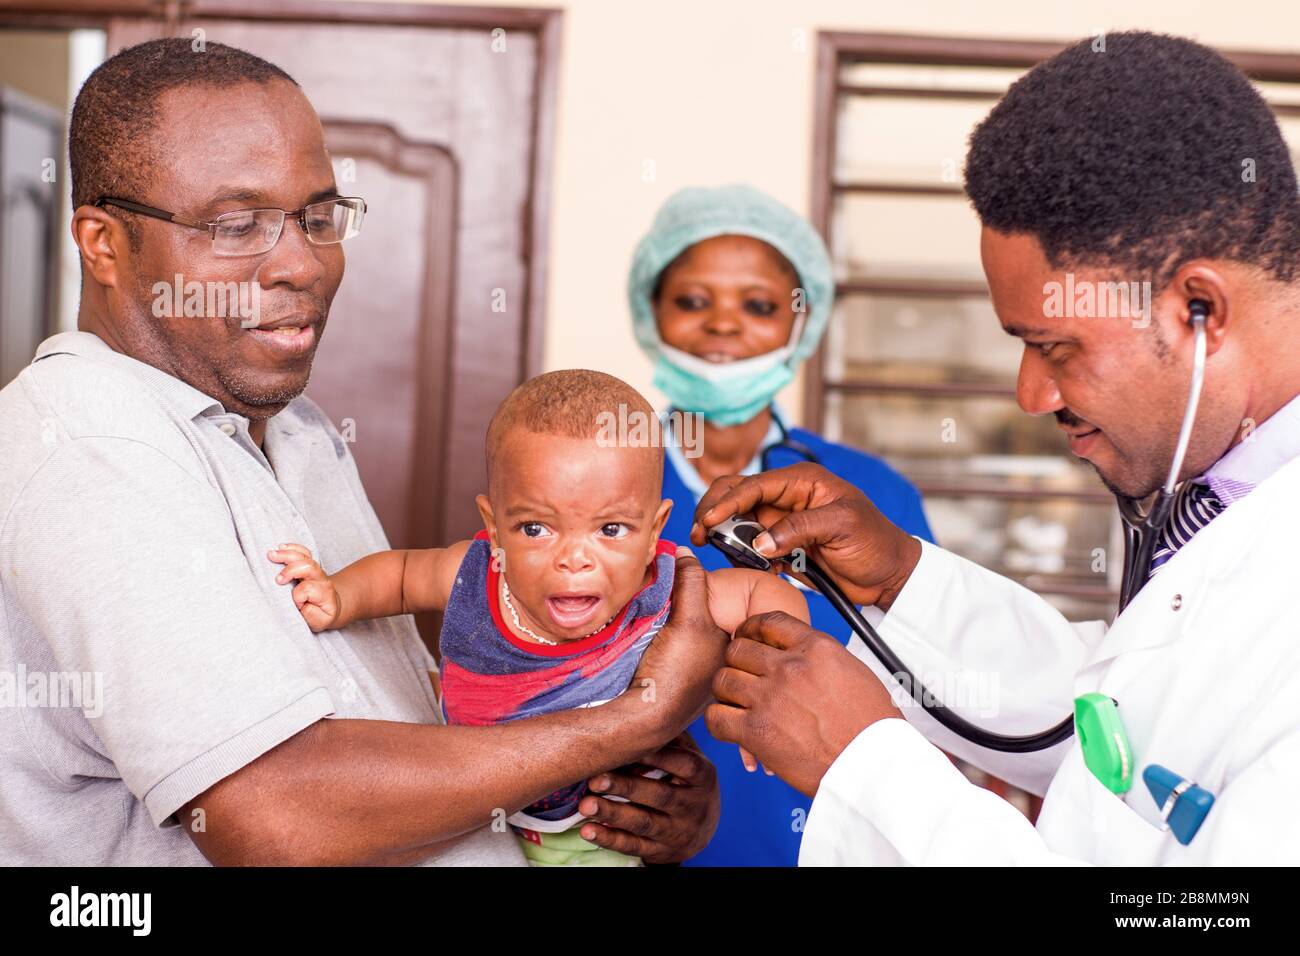 a young man catches his baby during the doctor examines him at the hospital. Stock Photo